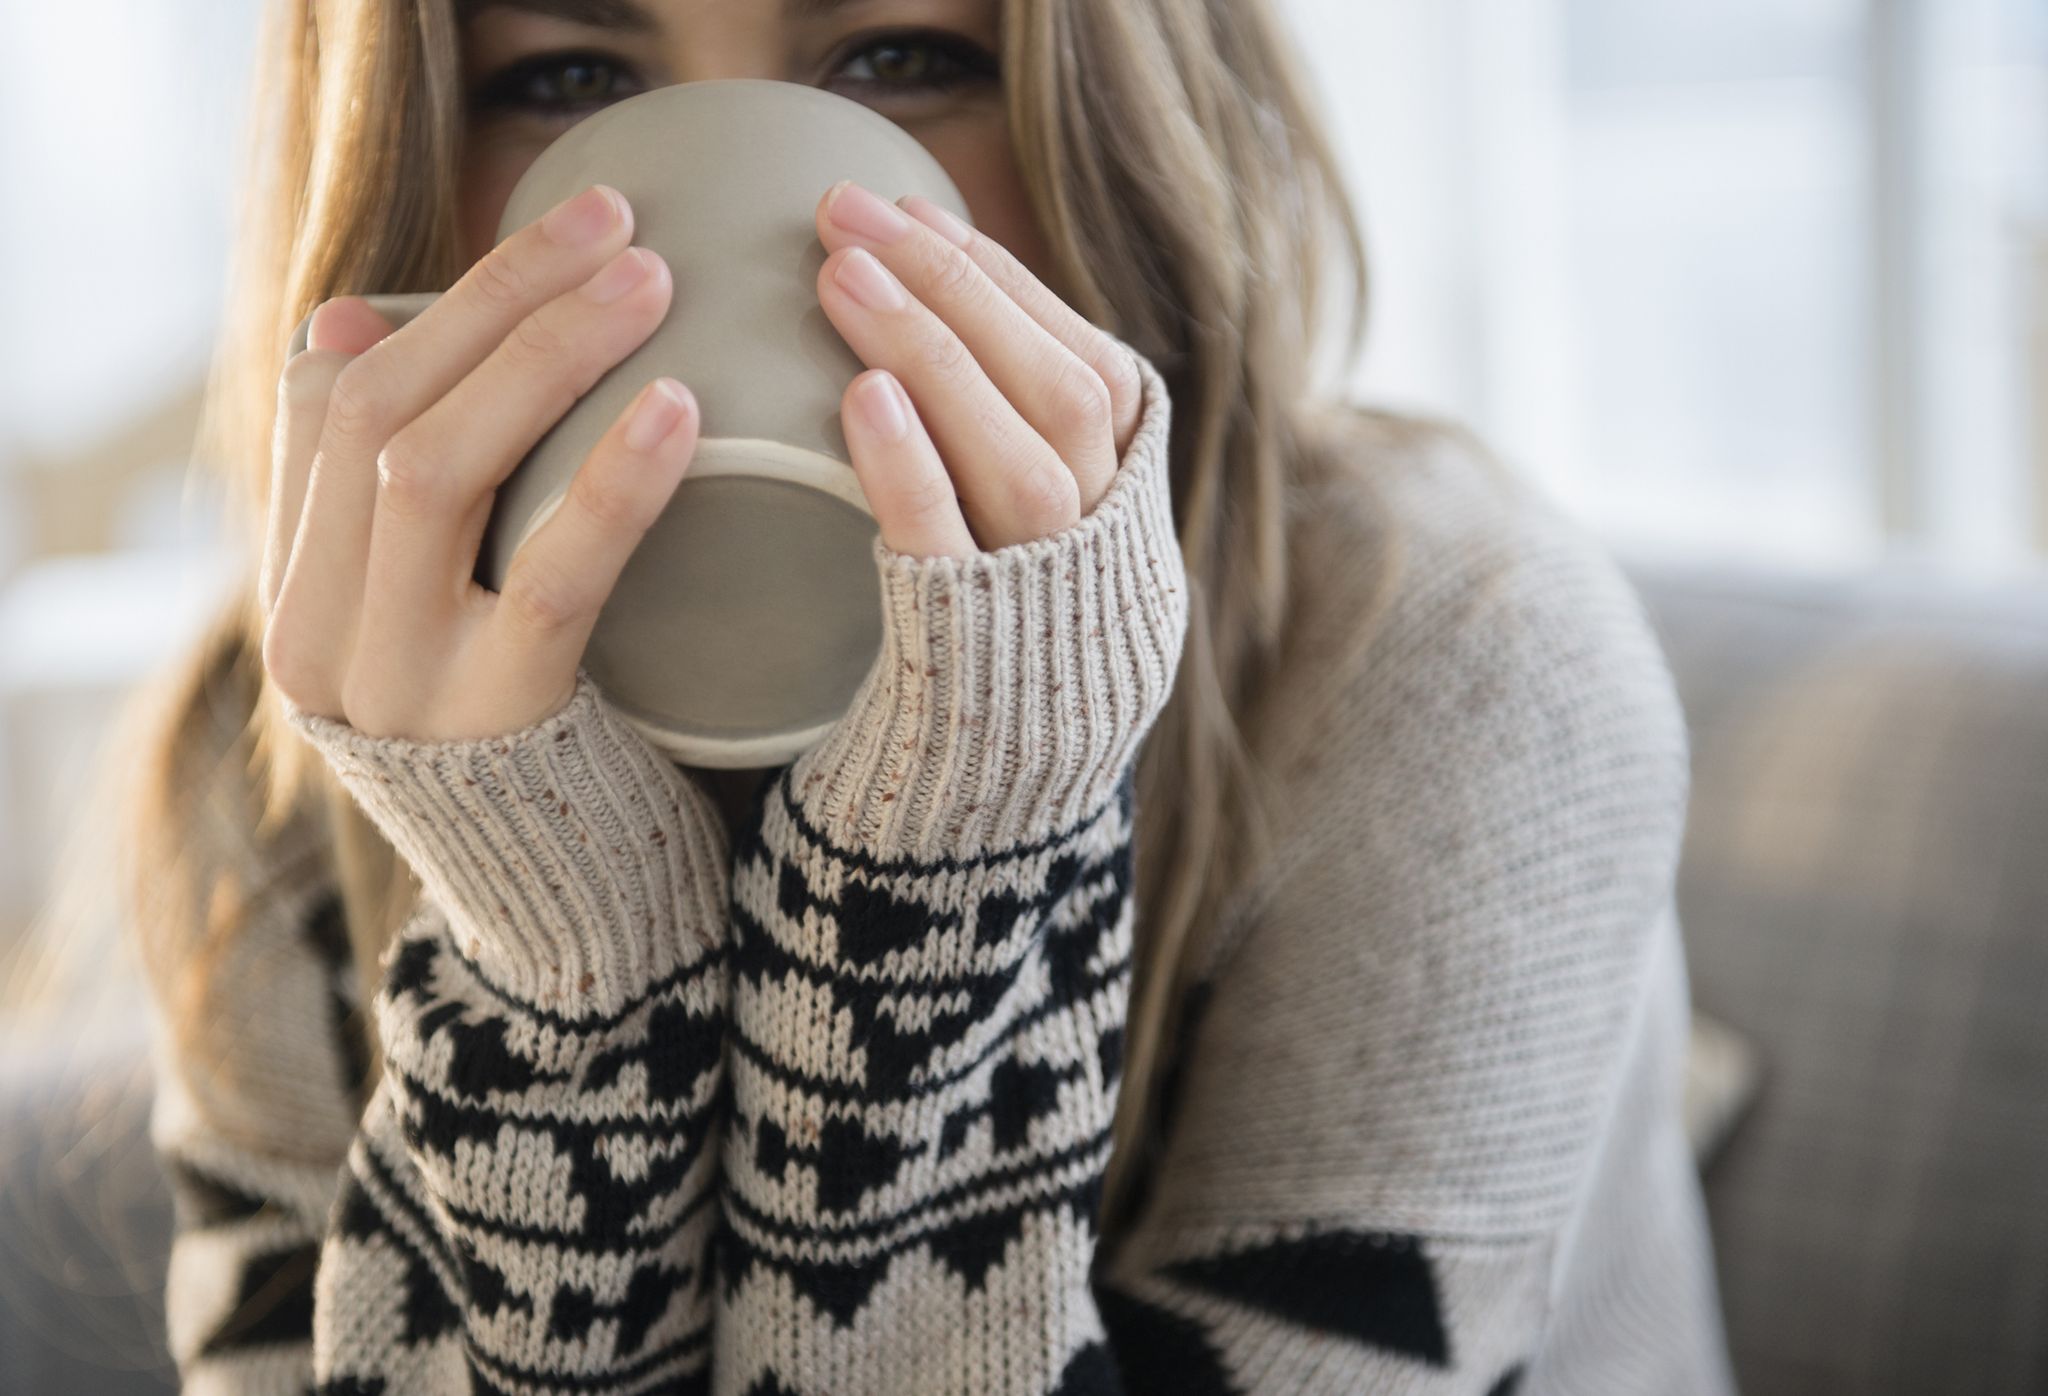 energy myths busted and tips on how to keep the house warm